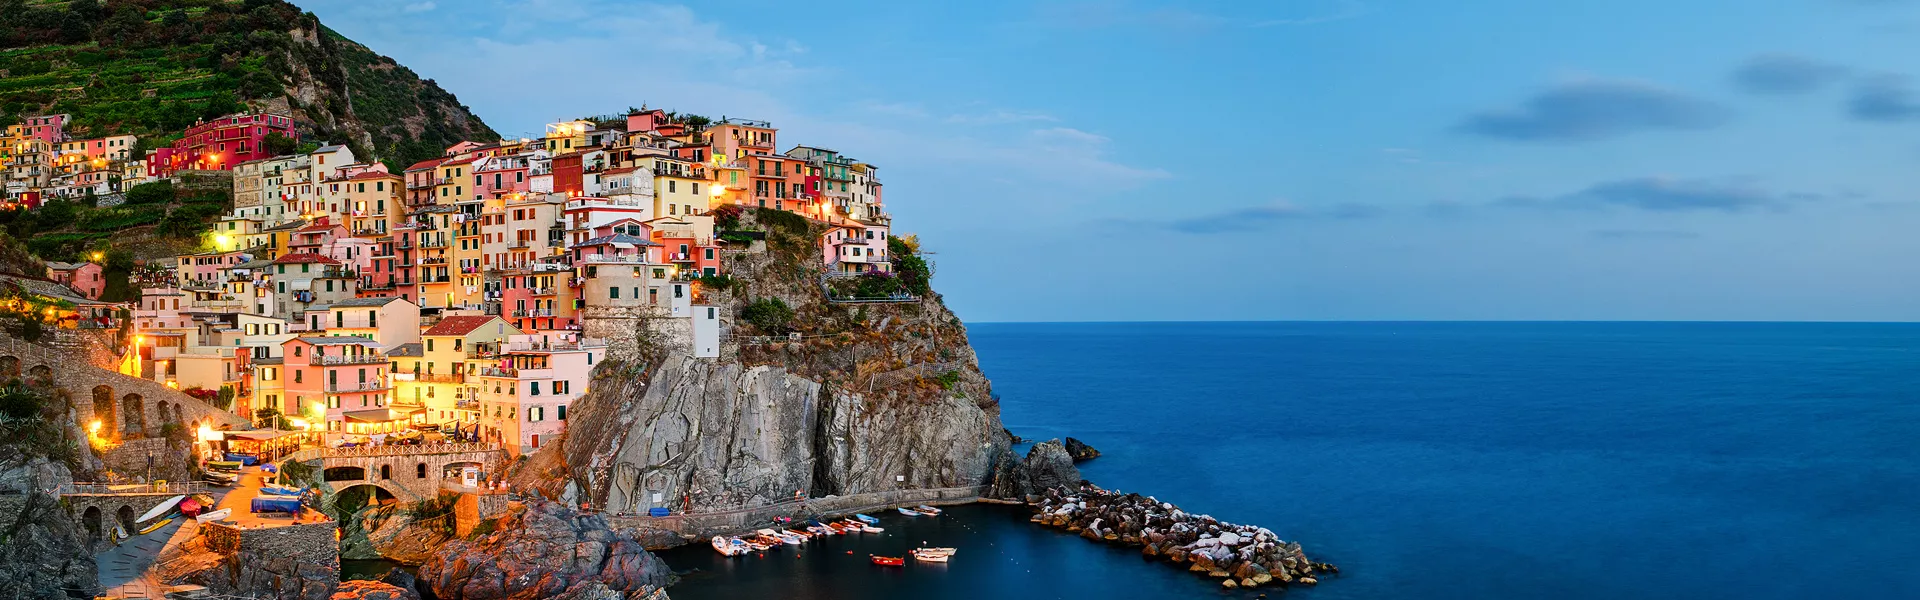 Italy Luxury Tours and Travel Guide